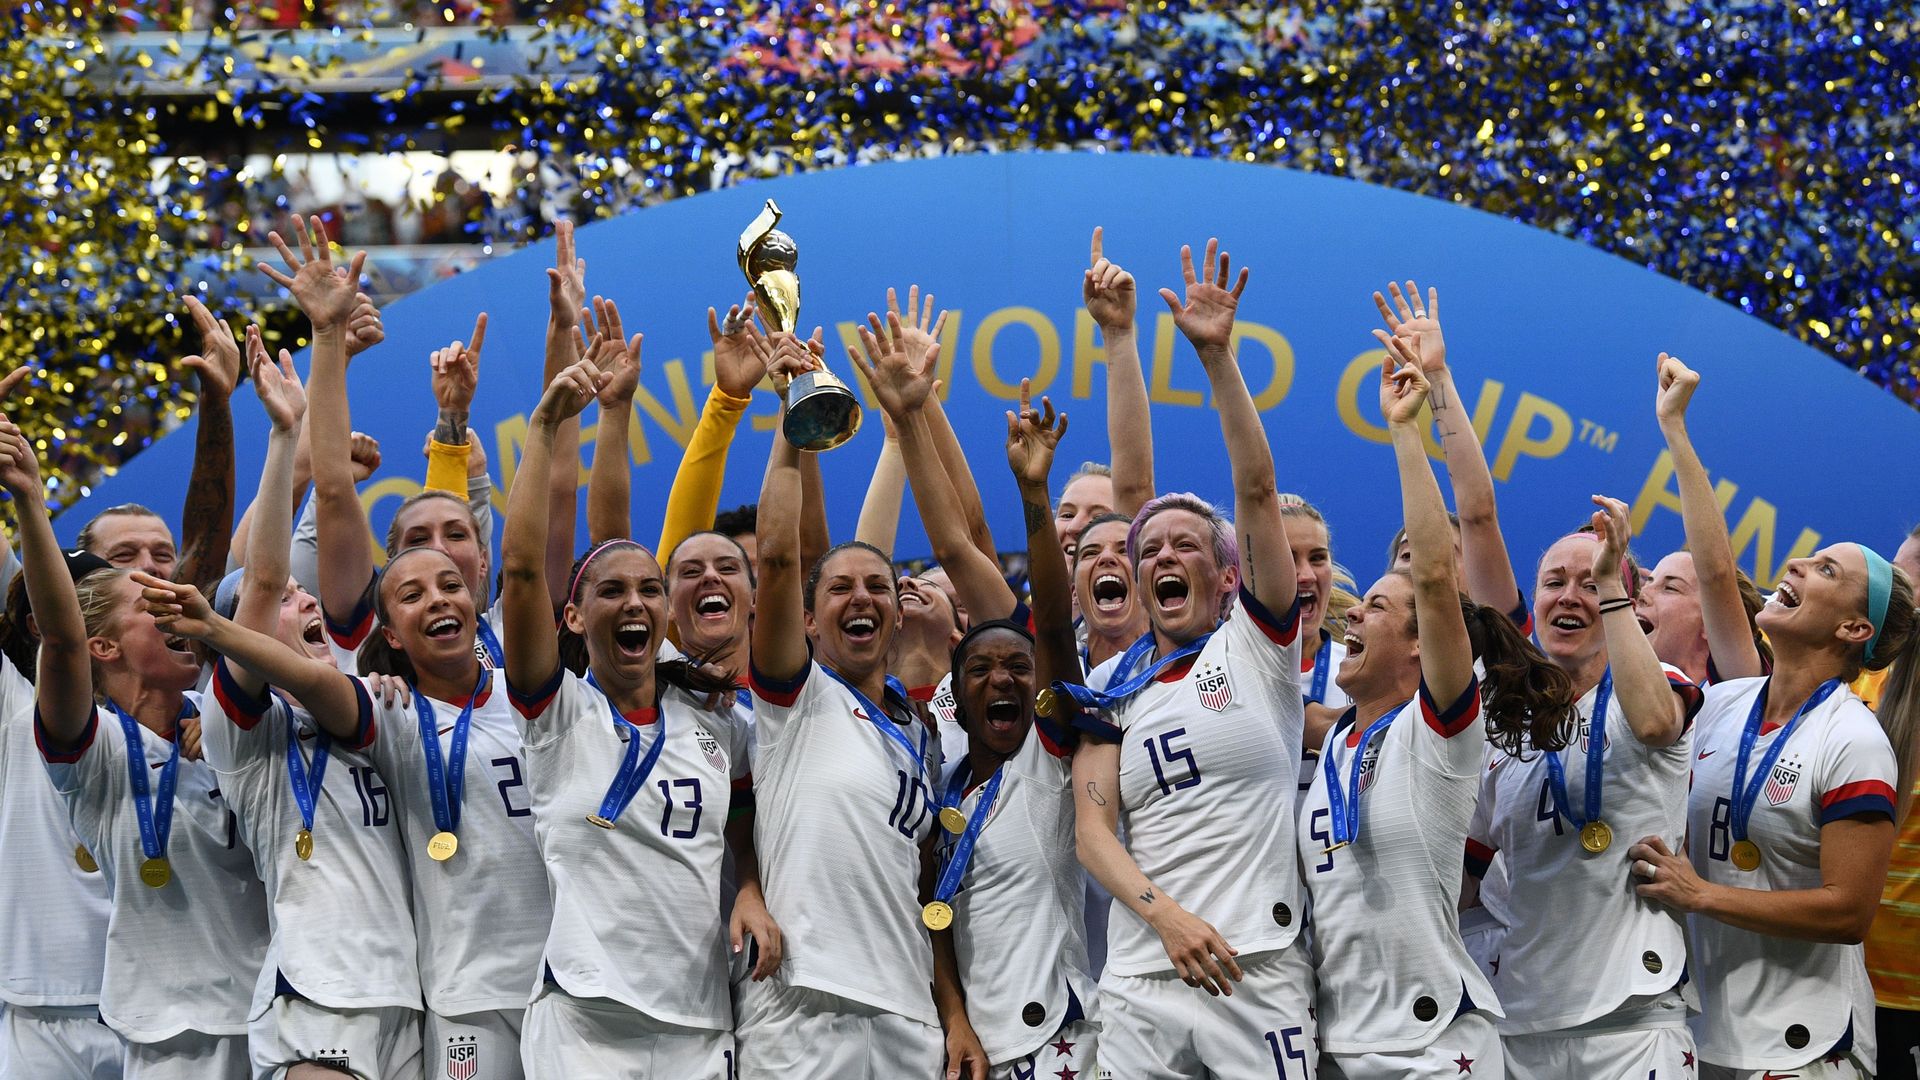 World s cup. World Cup. World Cup Champions. Womens World Cup. Nederland Football Team women World Cup 2019-.